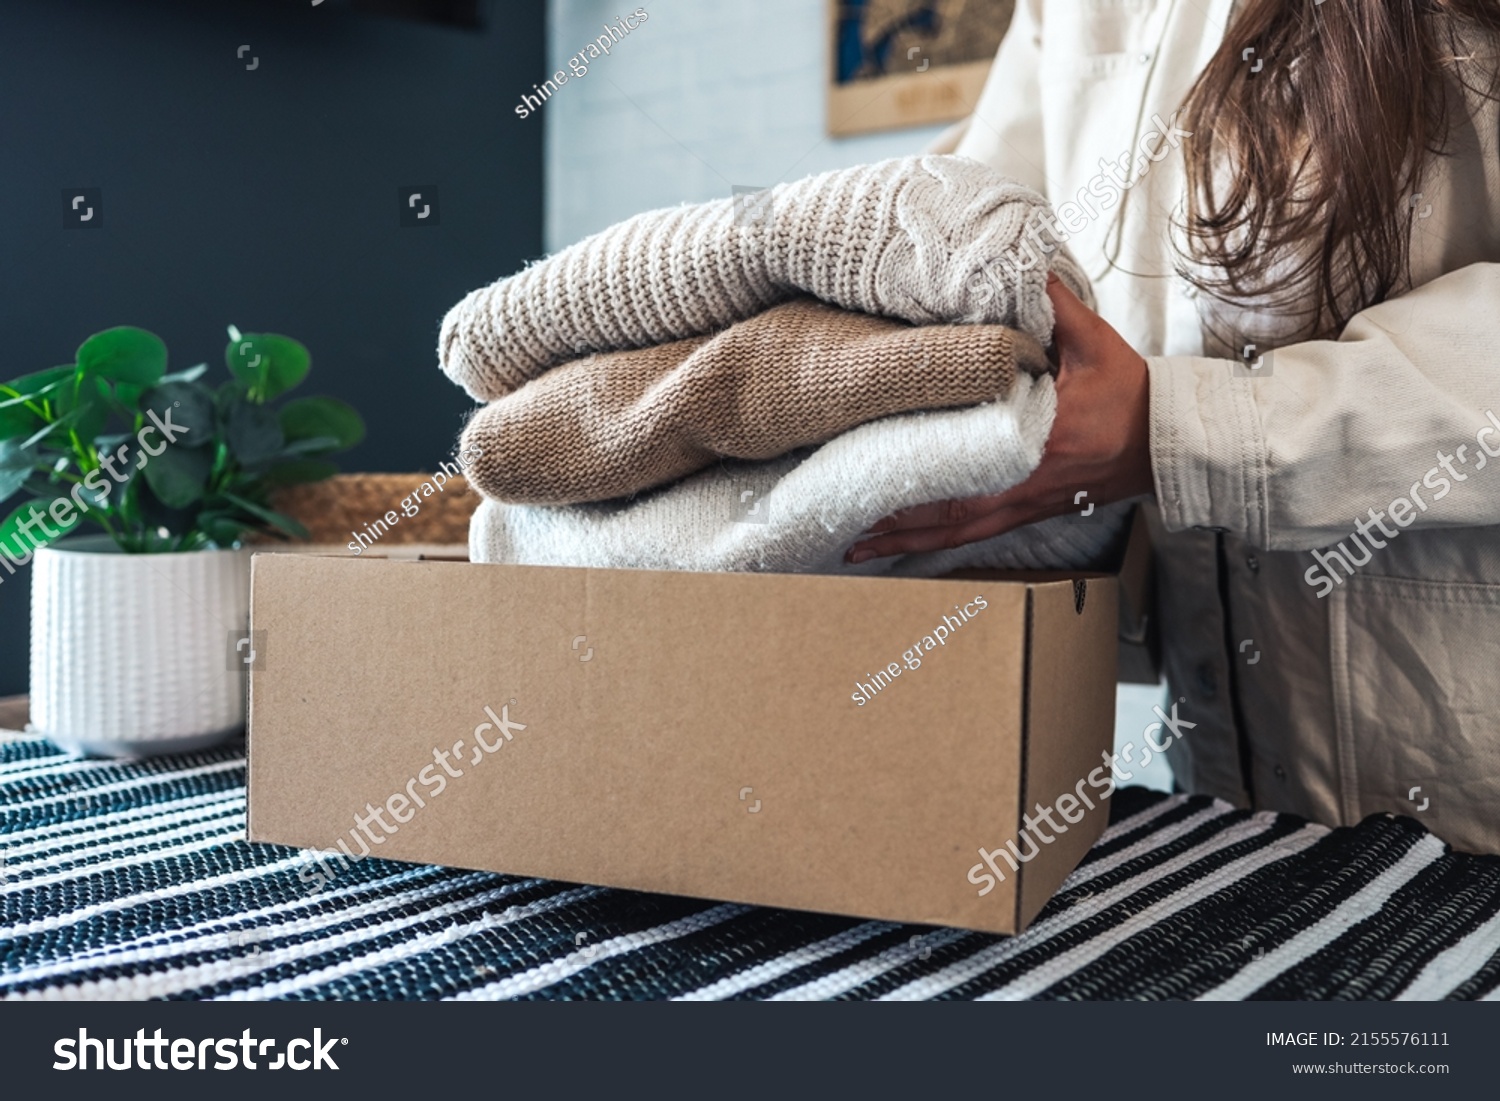 Woman holding Clothes with Donate Box In her room, Donation Concept. #2155576111